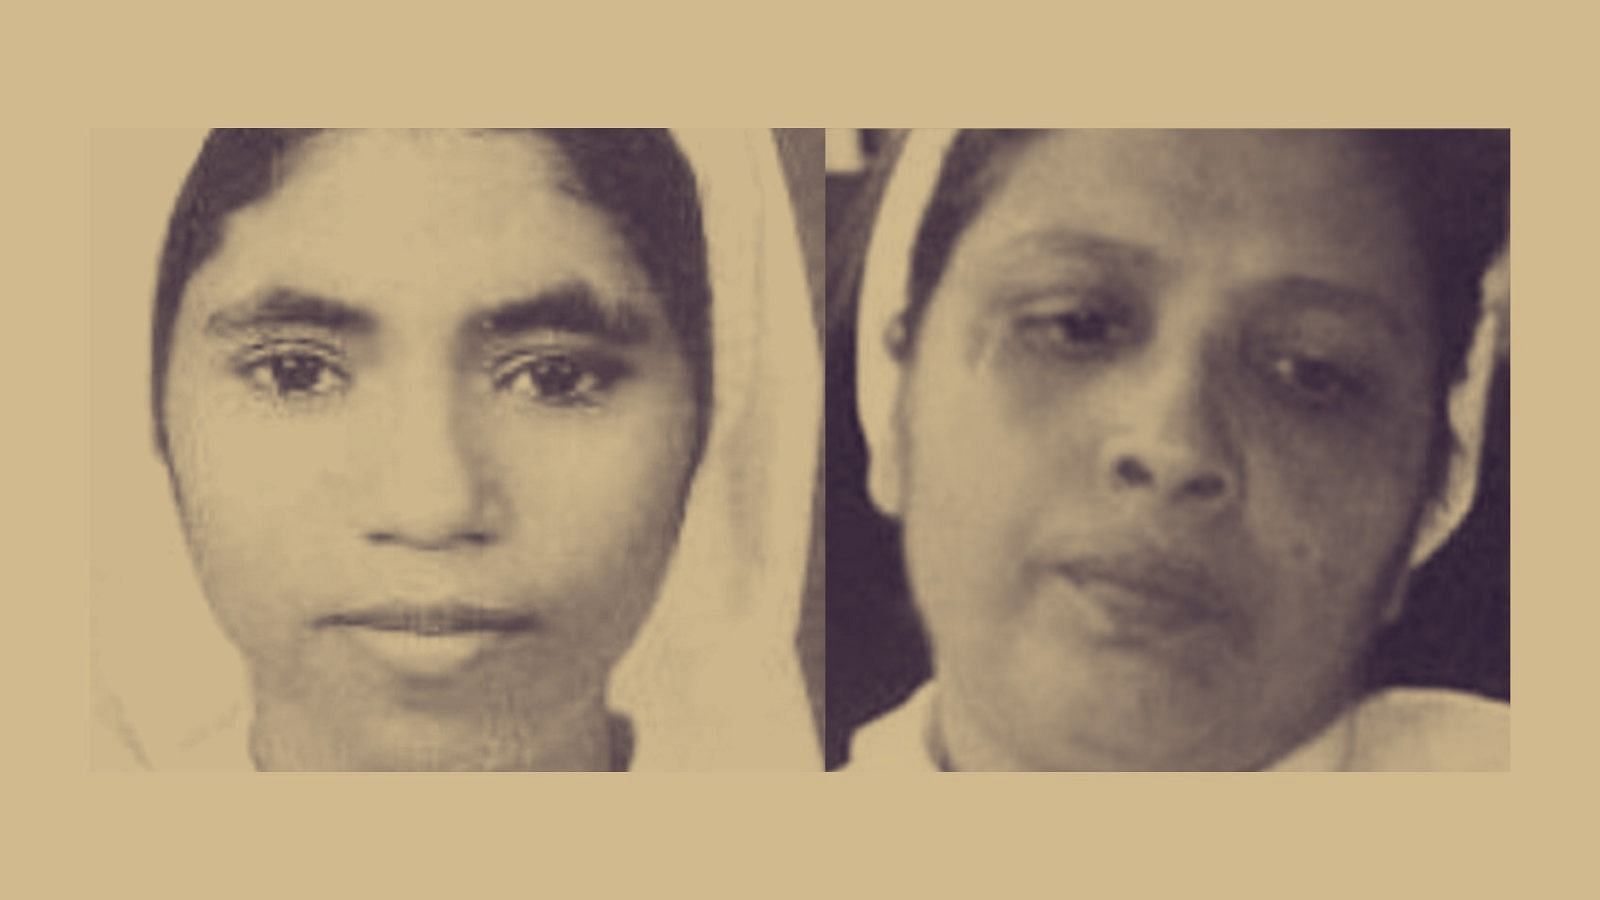 <div class="paragraphs"><p>The Delhi HC bench comprising Justice Swarna Kanta Sharma passed this order in a petition filed by Sister Sephy, an accused in the Sister Abhaya murder case that shook Kerala in the 1990s. </p></div>